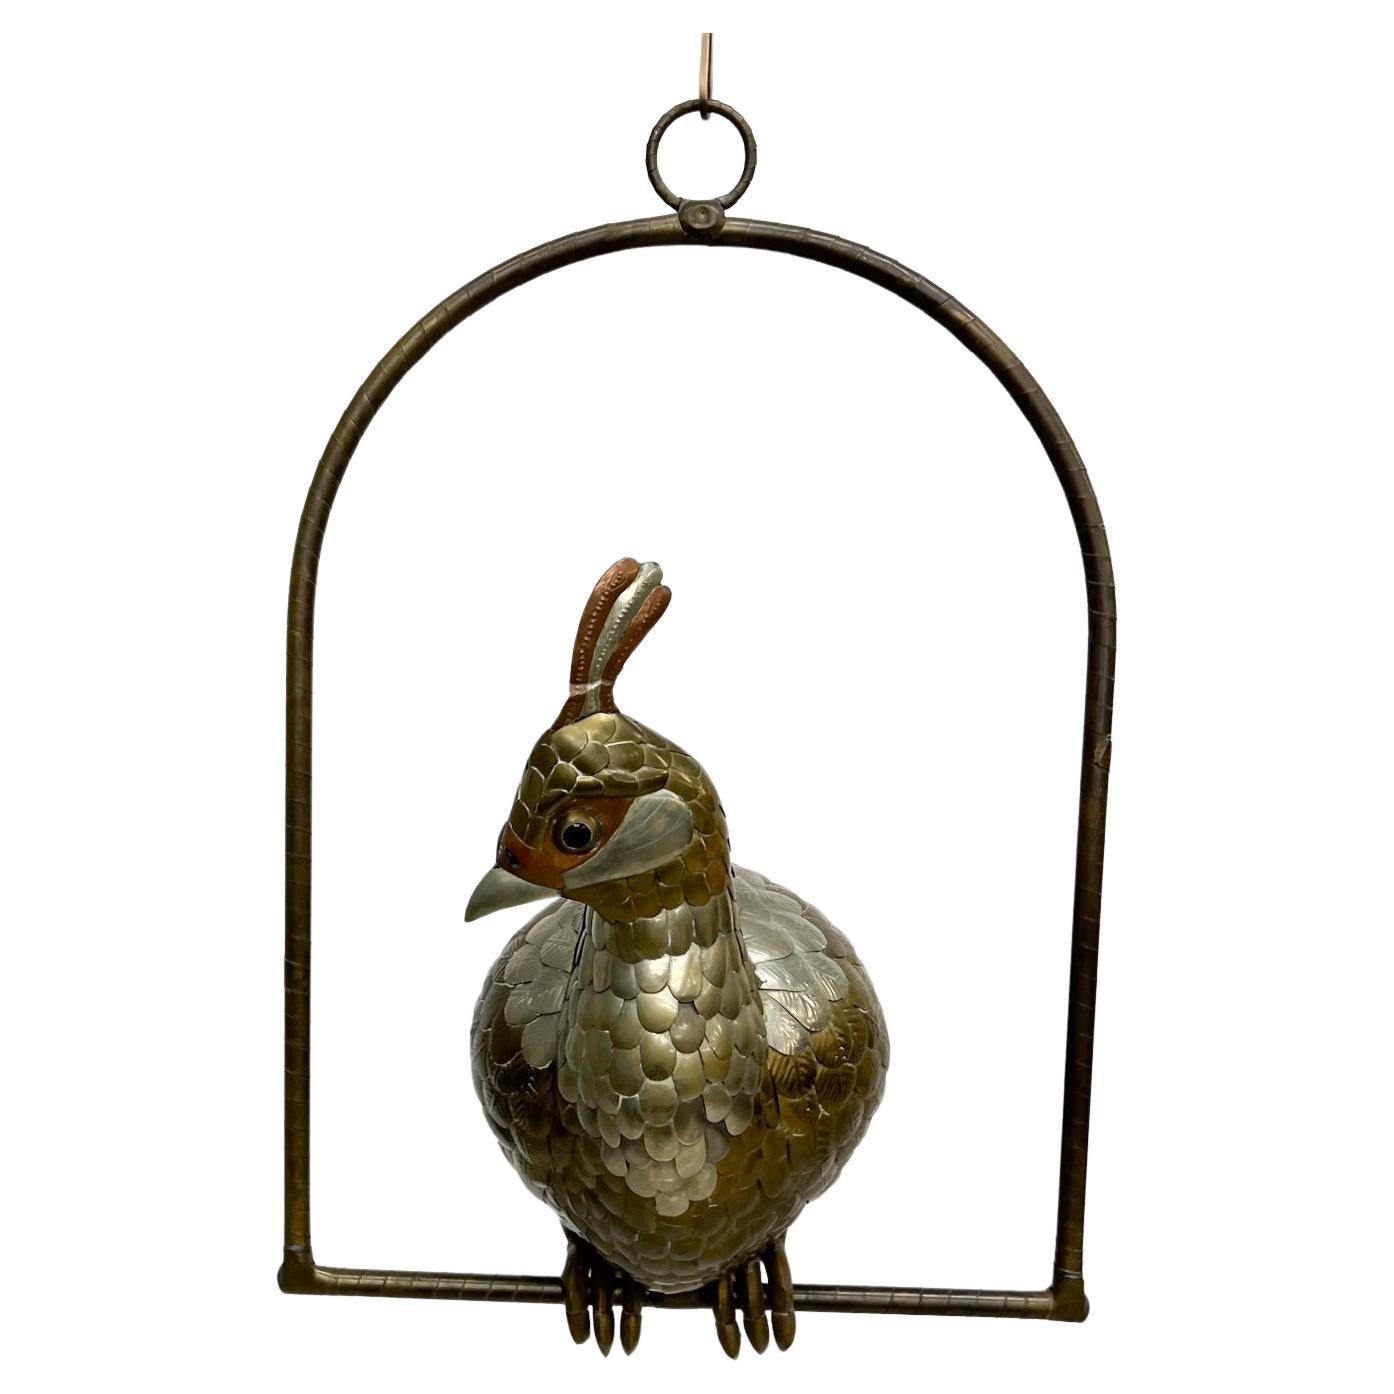 1970s Mexico Sergio Bustamante Hanging Metal Parrot Cockatoo Bird perched on a Swing.
Sculpted in gold, silver and copper toned metal elements.
Maker signed and numbered.
33 tall x 19 w x 18.5 d
Preowned original vintage condition
See images